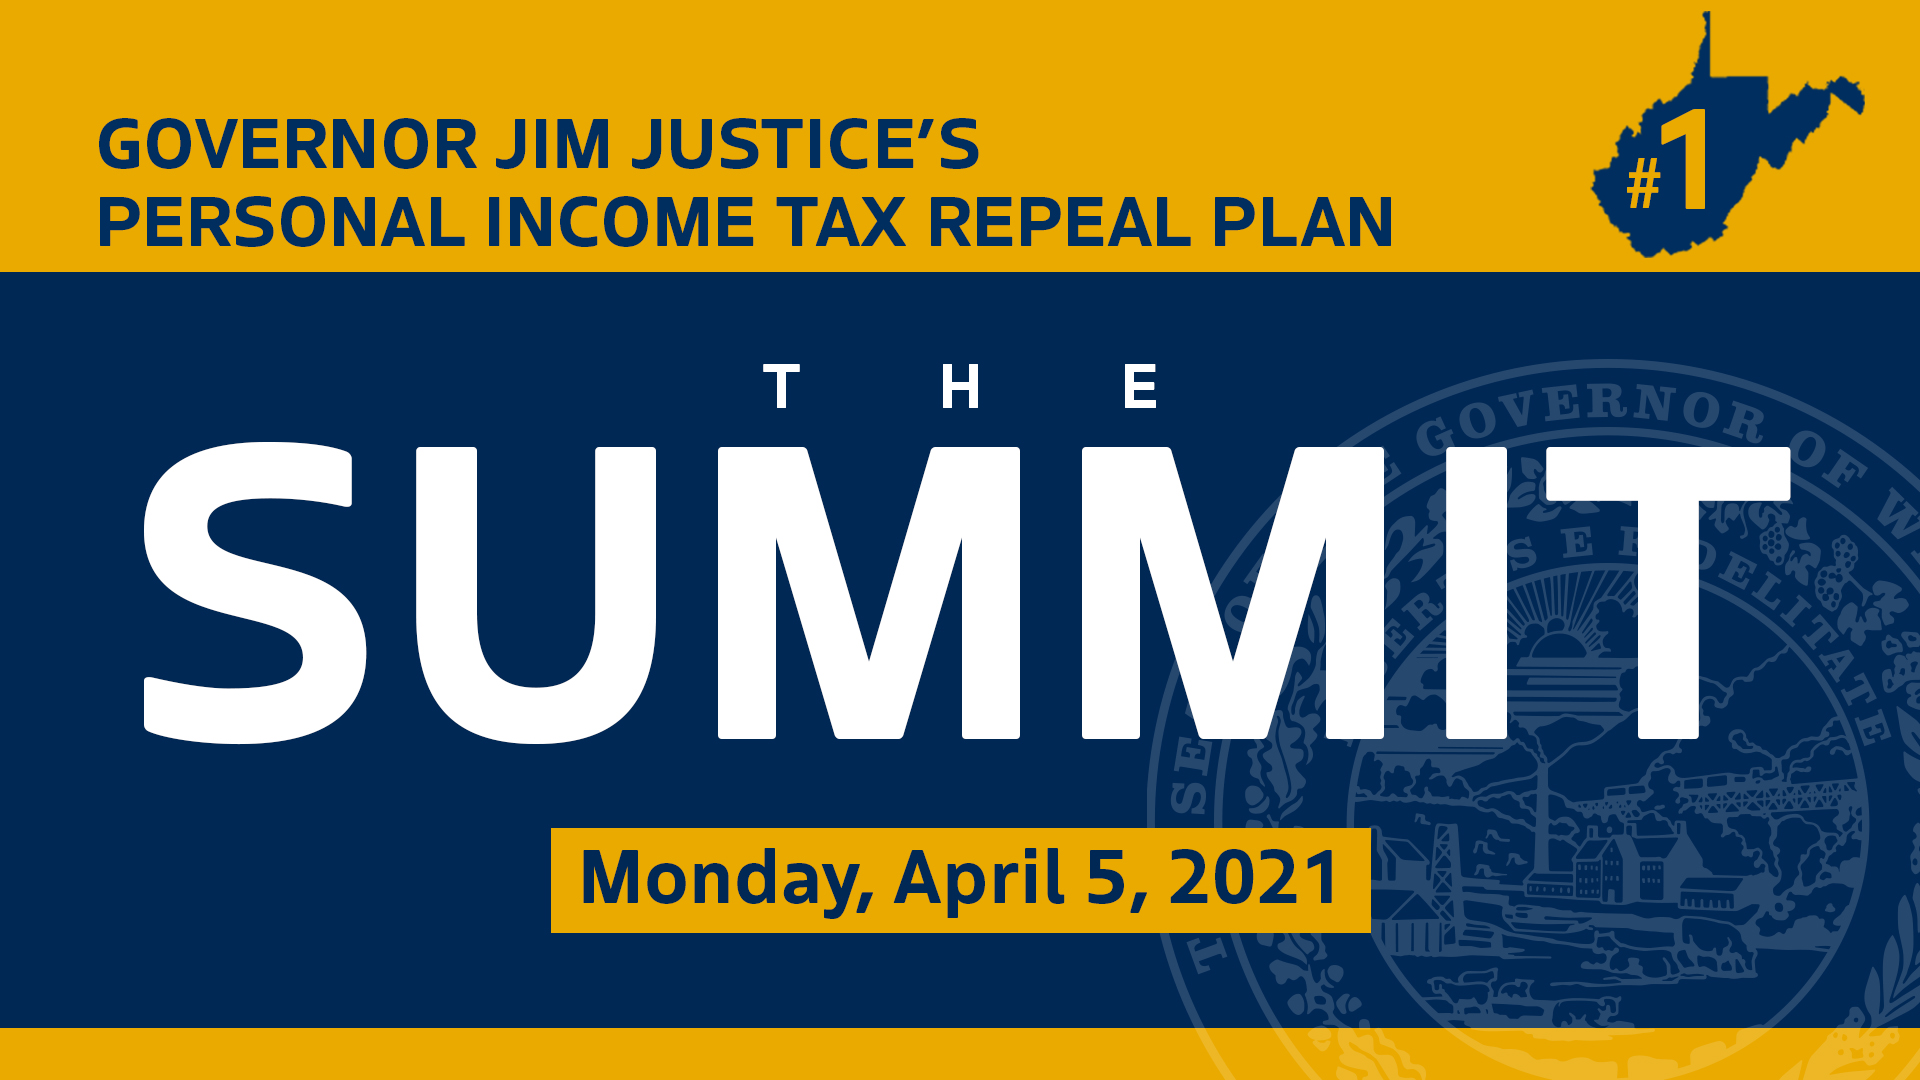 Gov Justice Hosts Virtual Media Briefing On Plan To Repeal State Income Tax